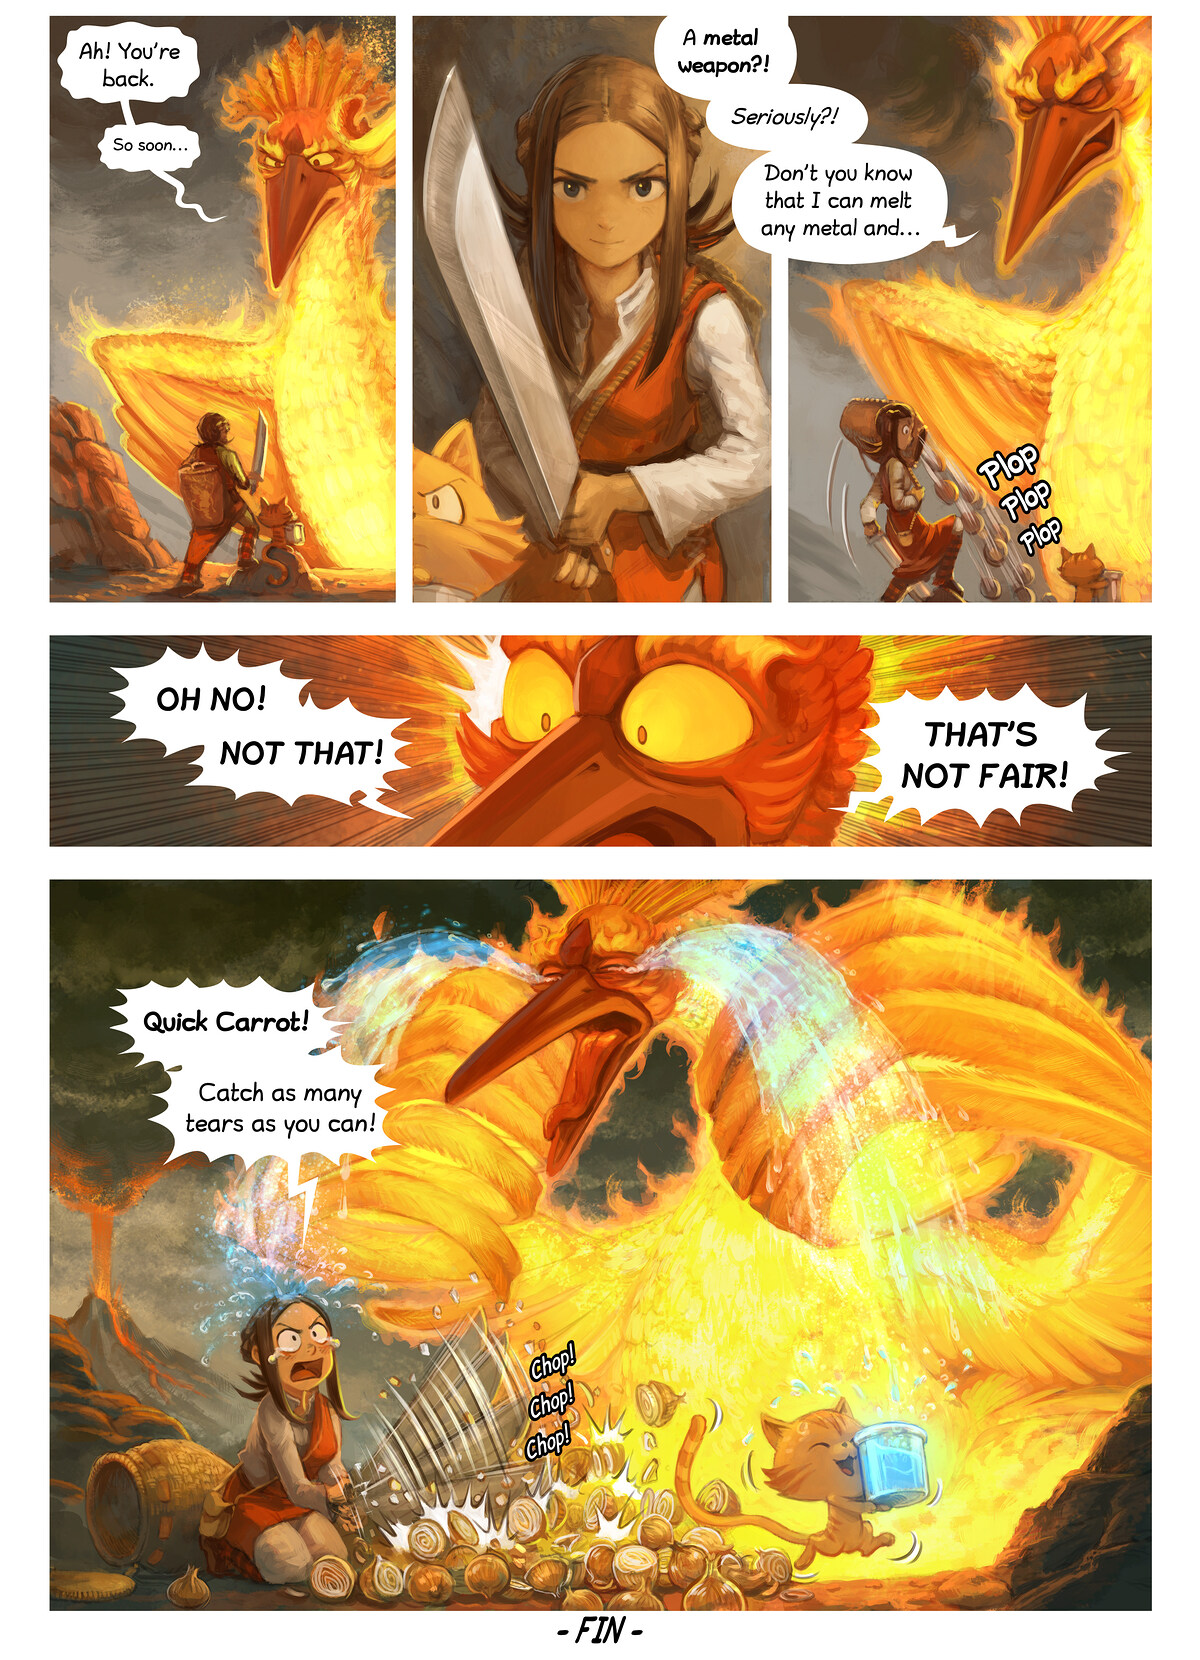 Episode 37: The Tears of the Phoenix, Page 8